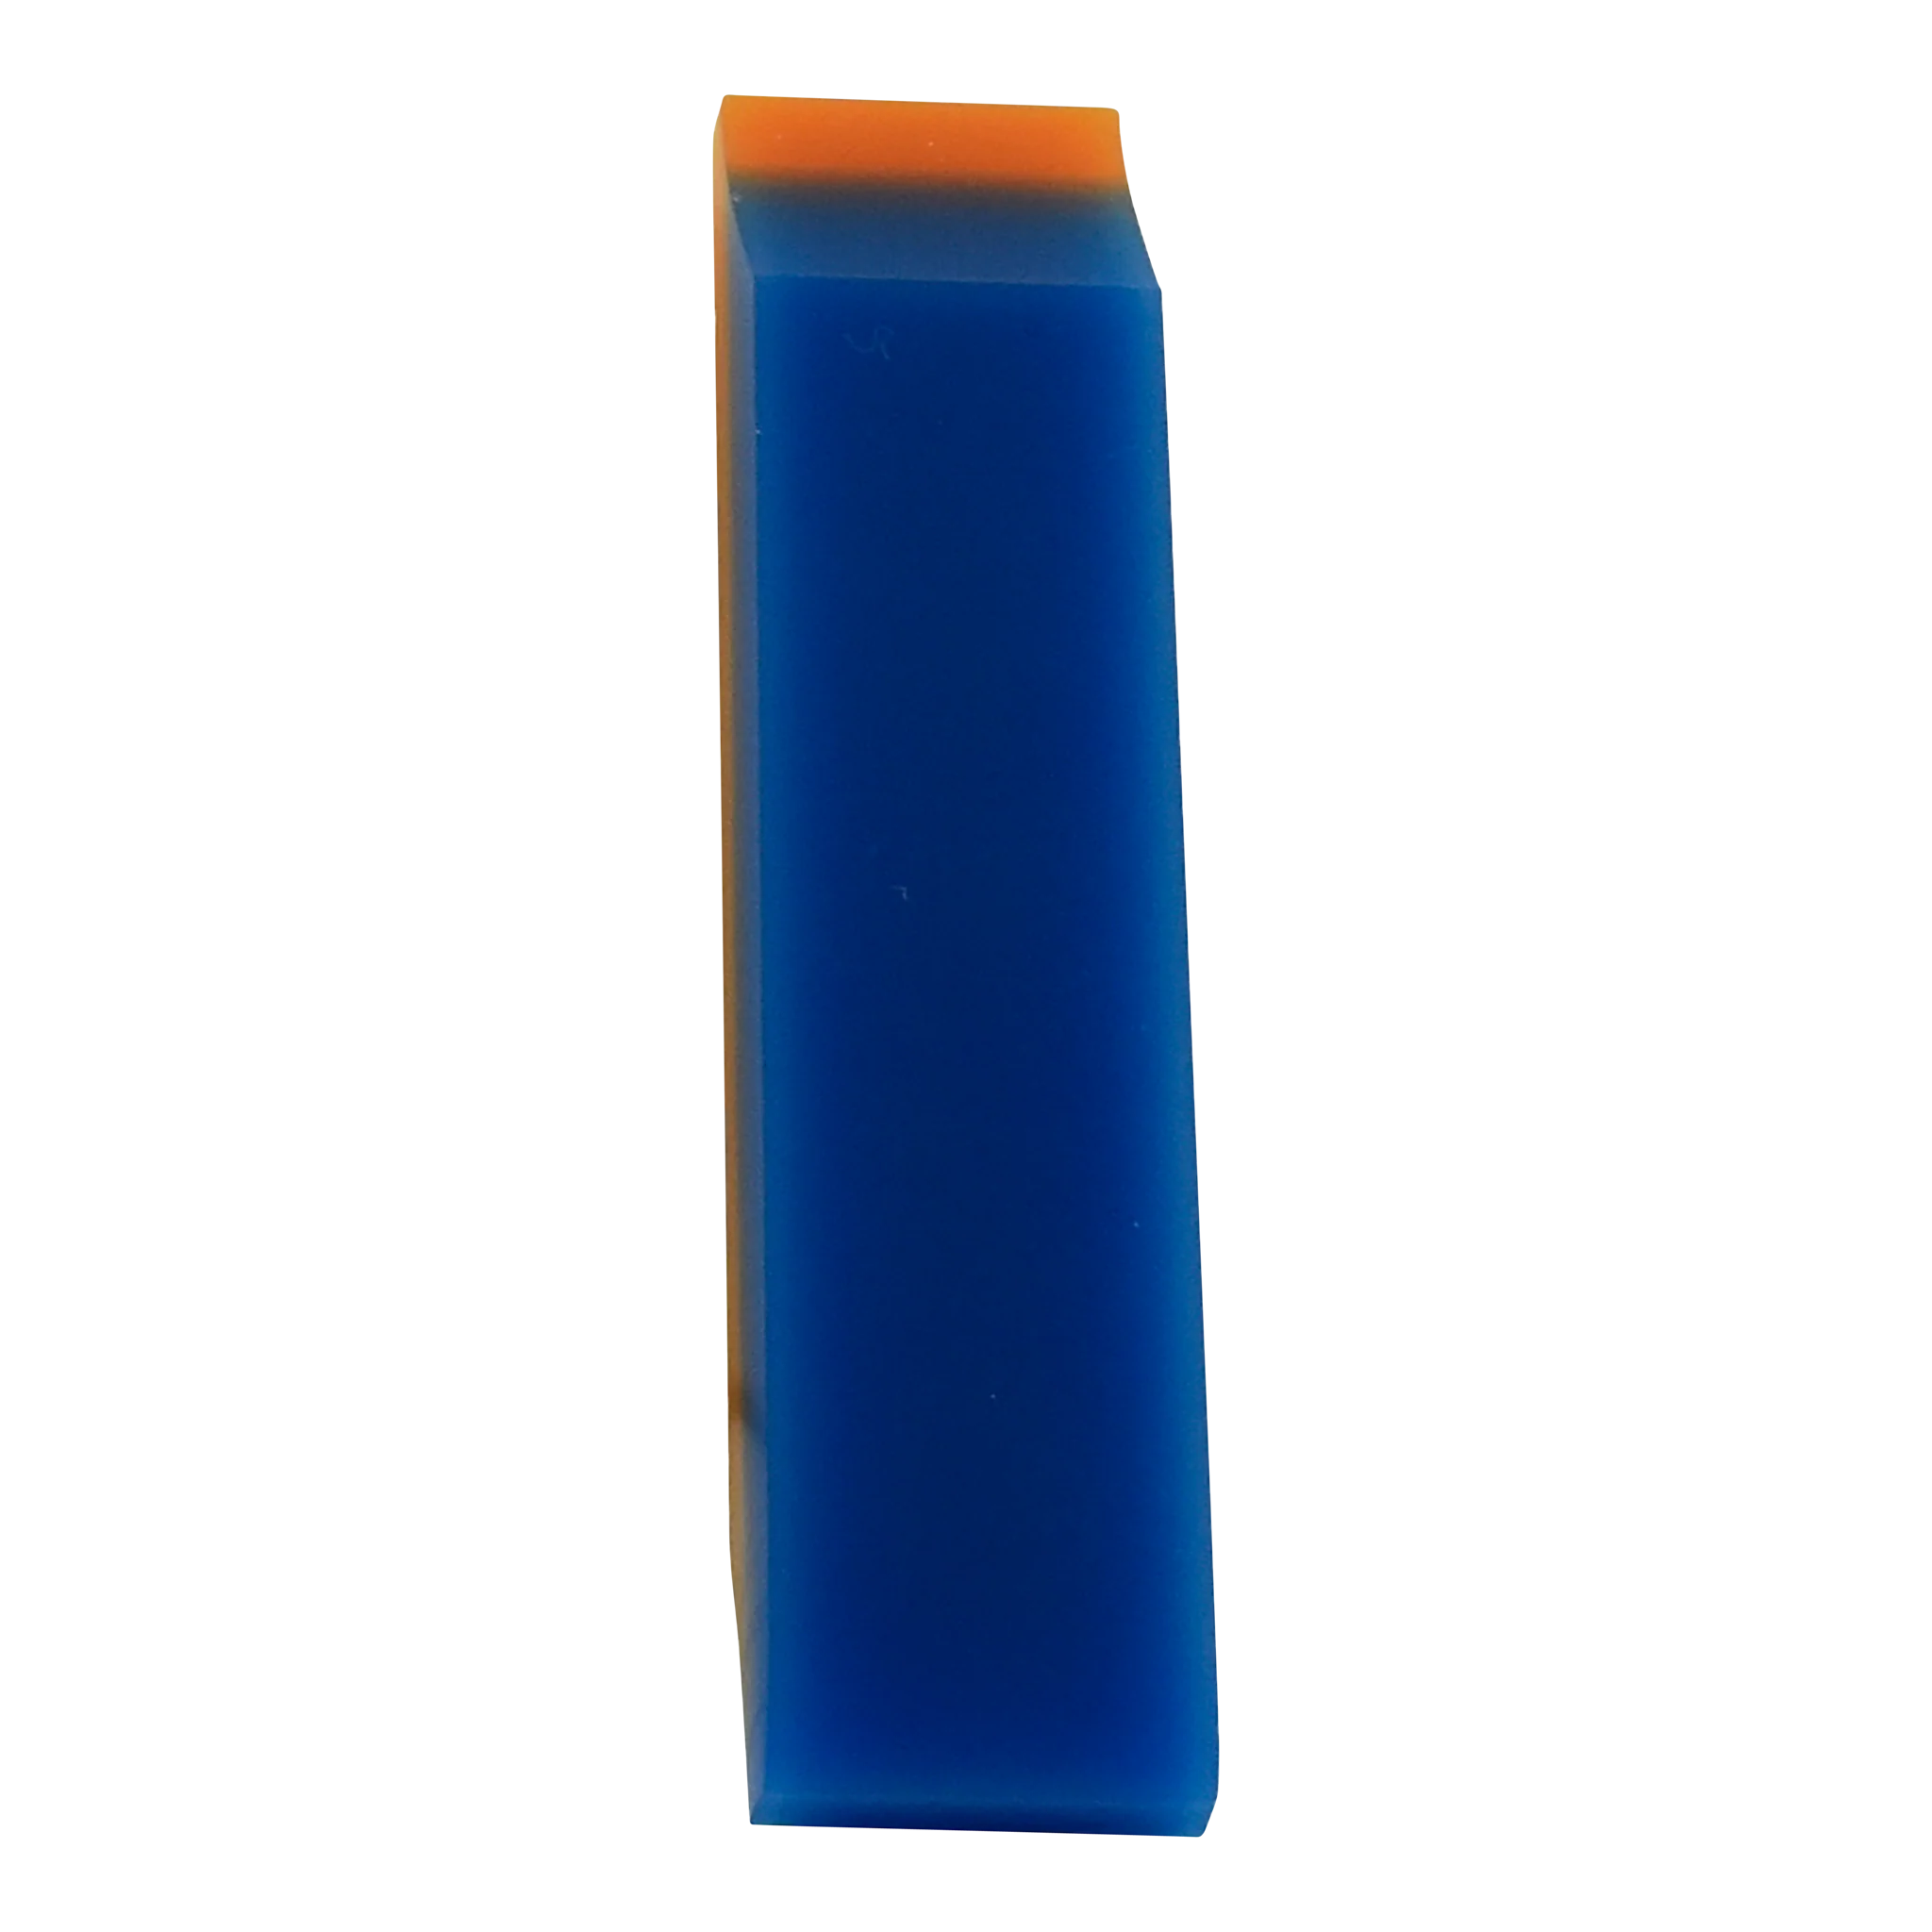 0.5” Detail PPF Hybrid Paddle Squeegee